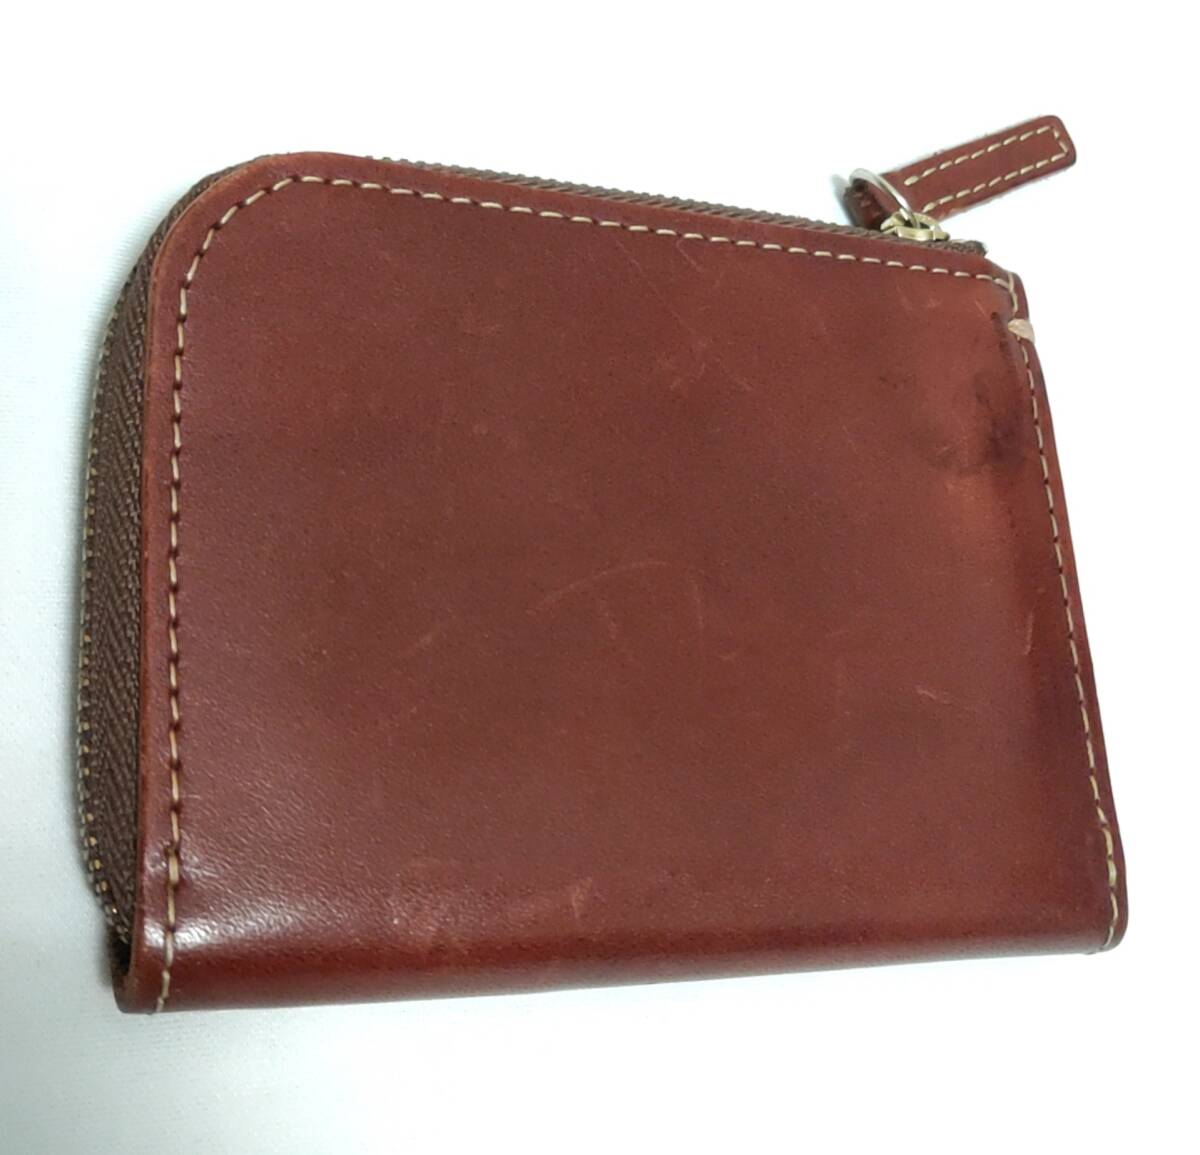  earth shop bag L character purse leather Brown wallet 